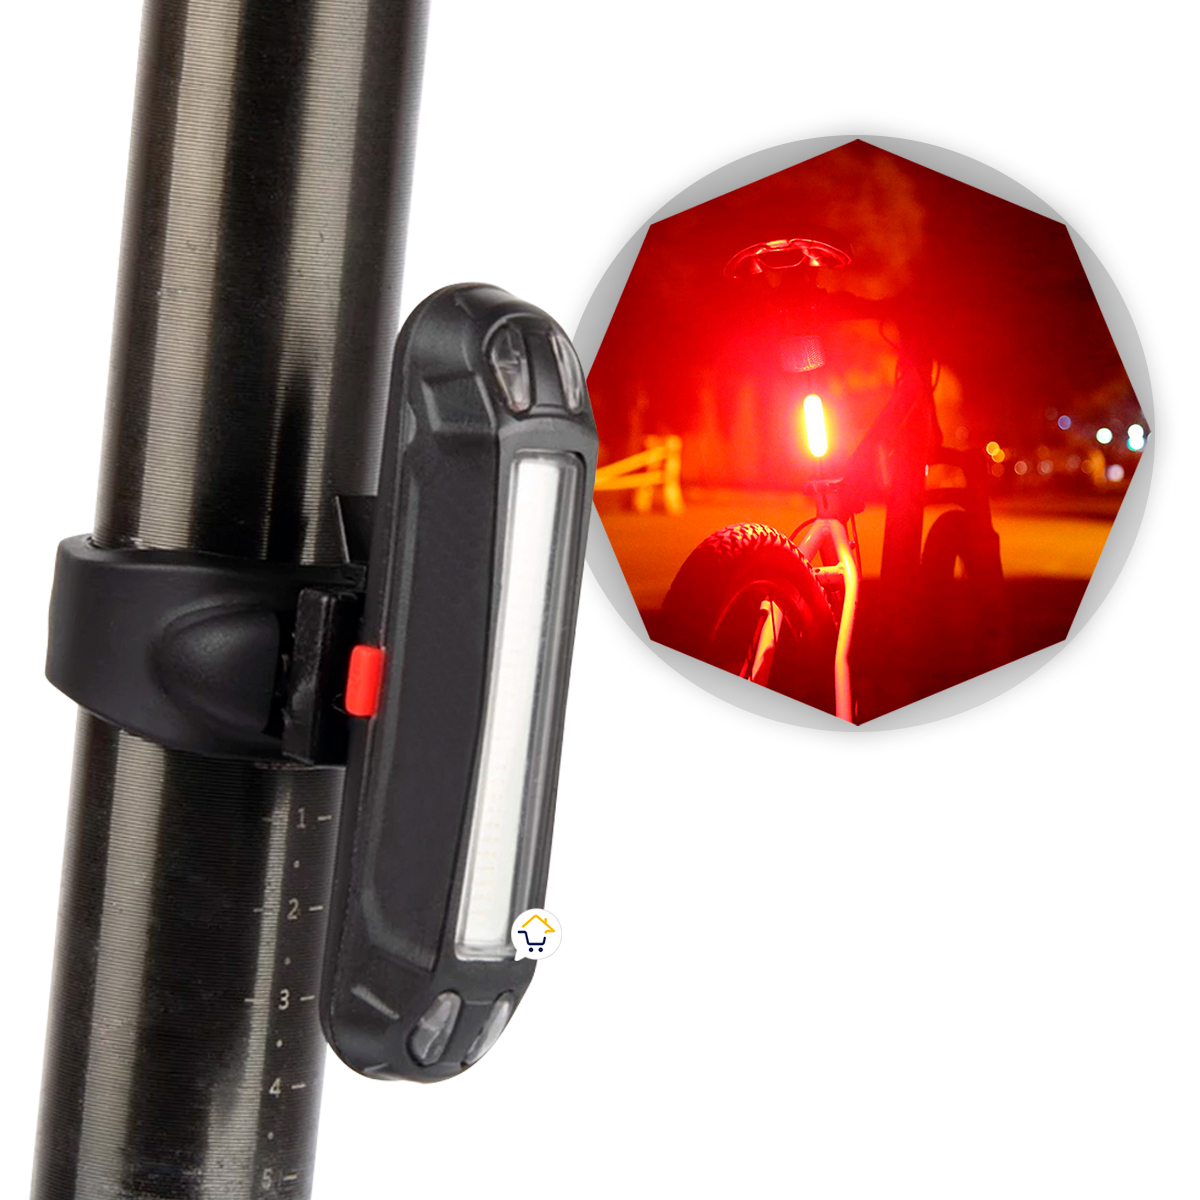 stop-bicicleta-impermeable-luz-led-recargable-ciclismo-of399